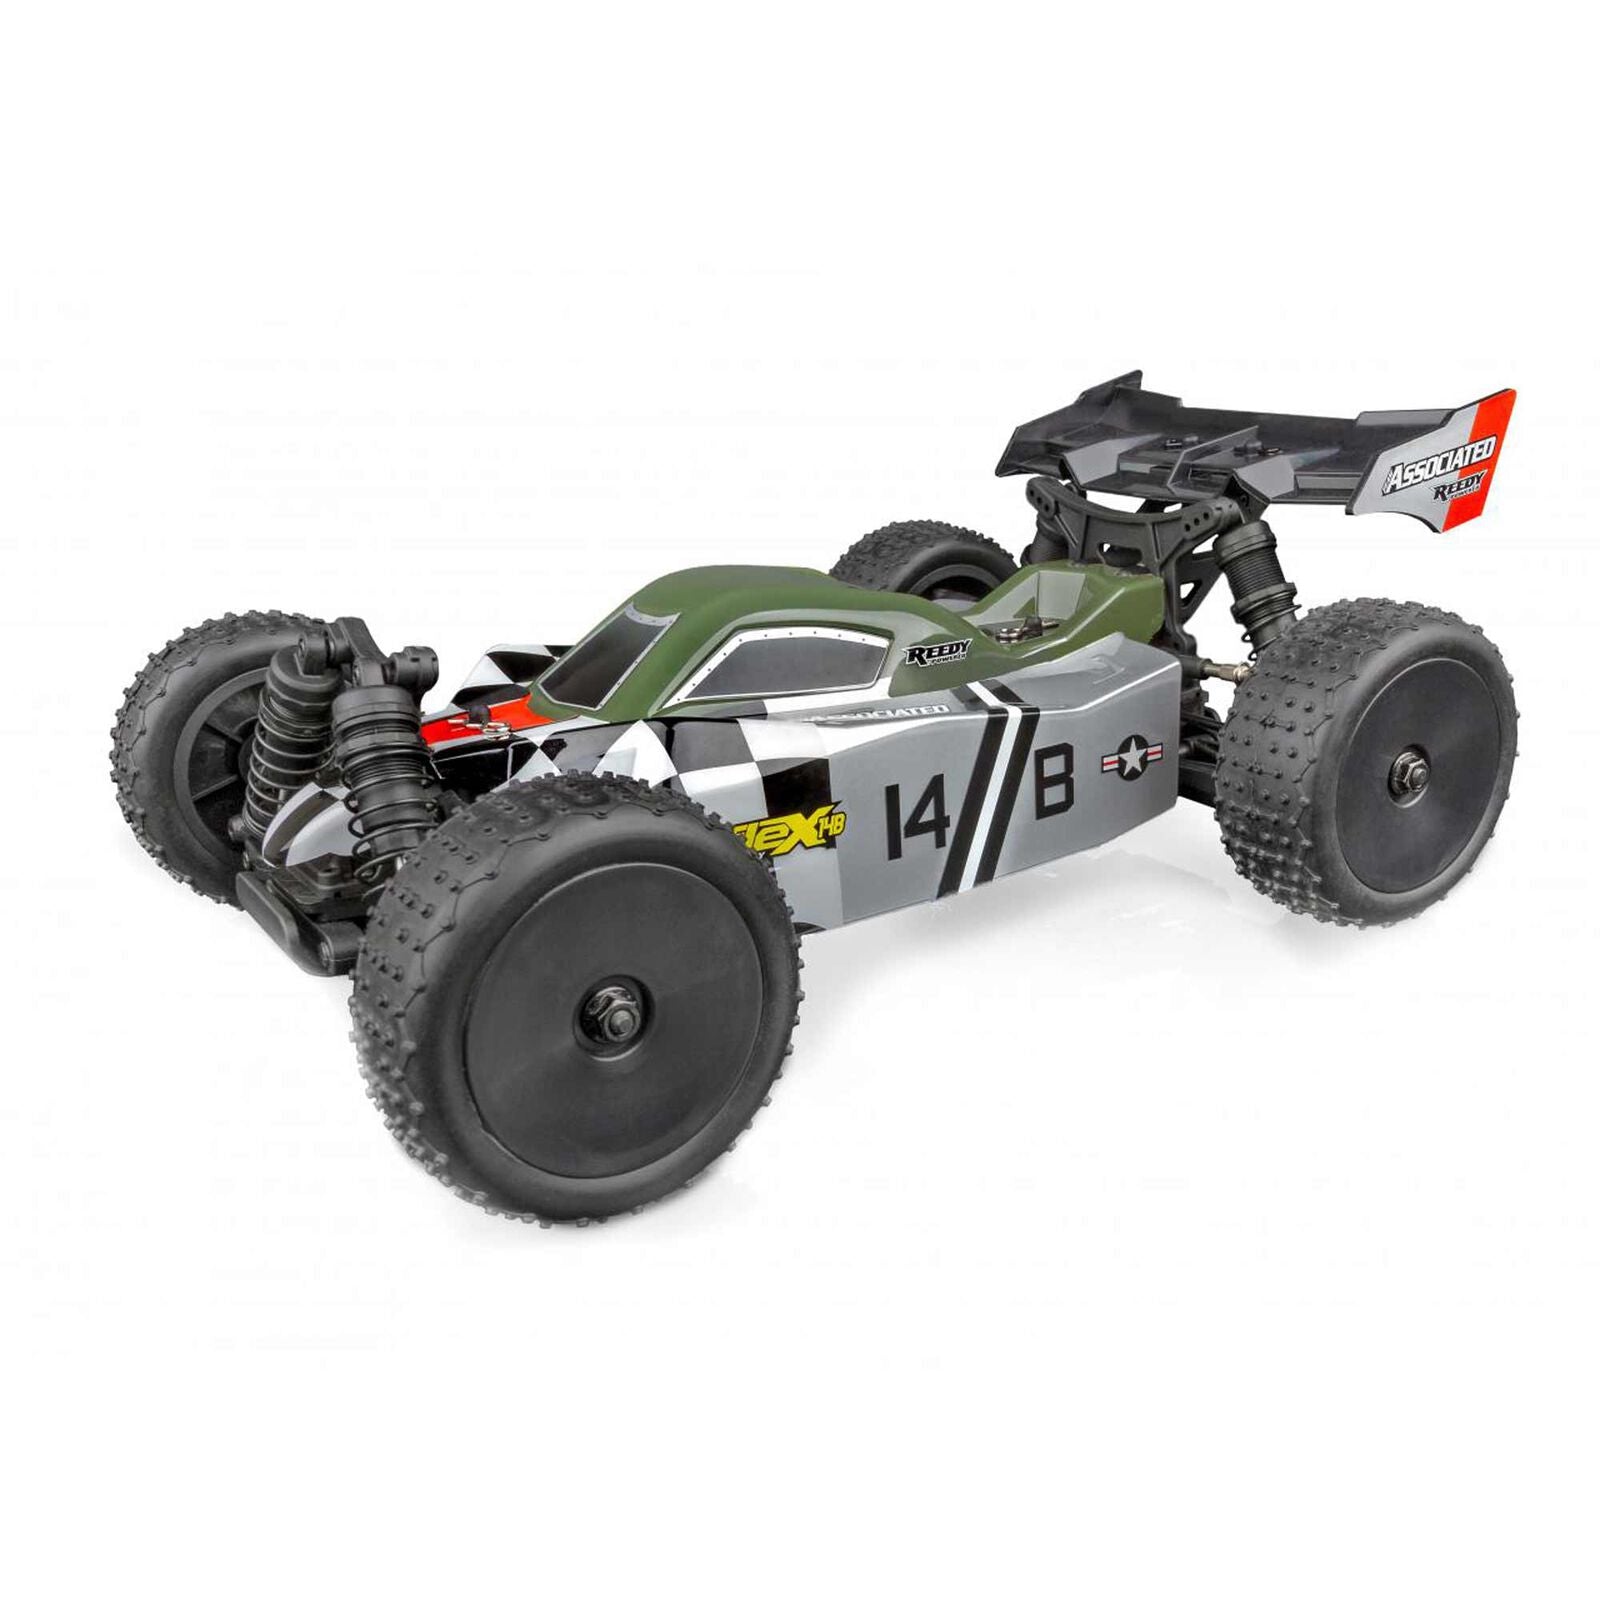 ASSOCIATED 20175 1/14 Reflex 14B 4WD Brushless Buggy RTR